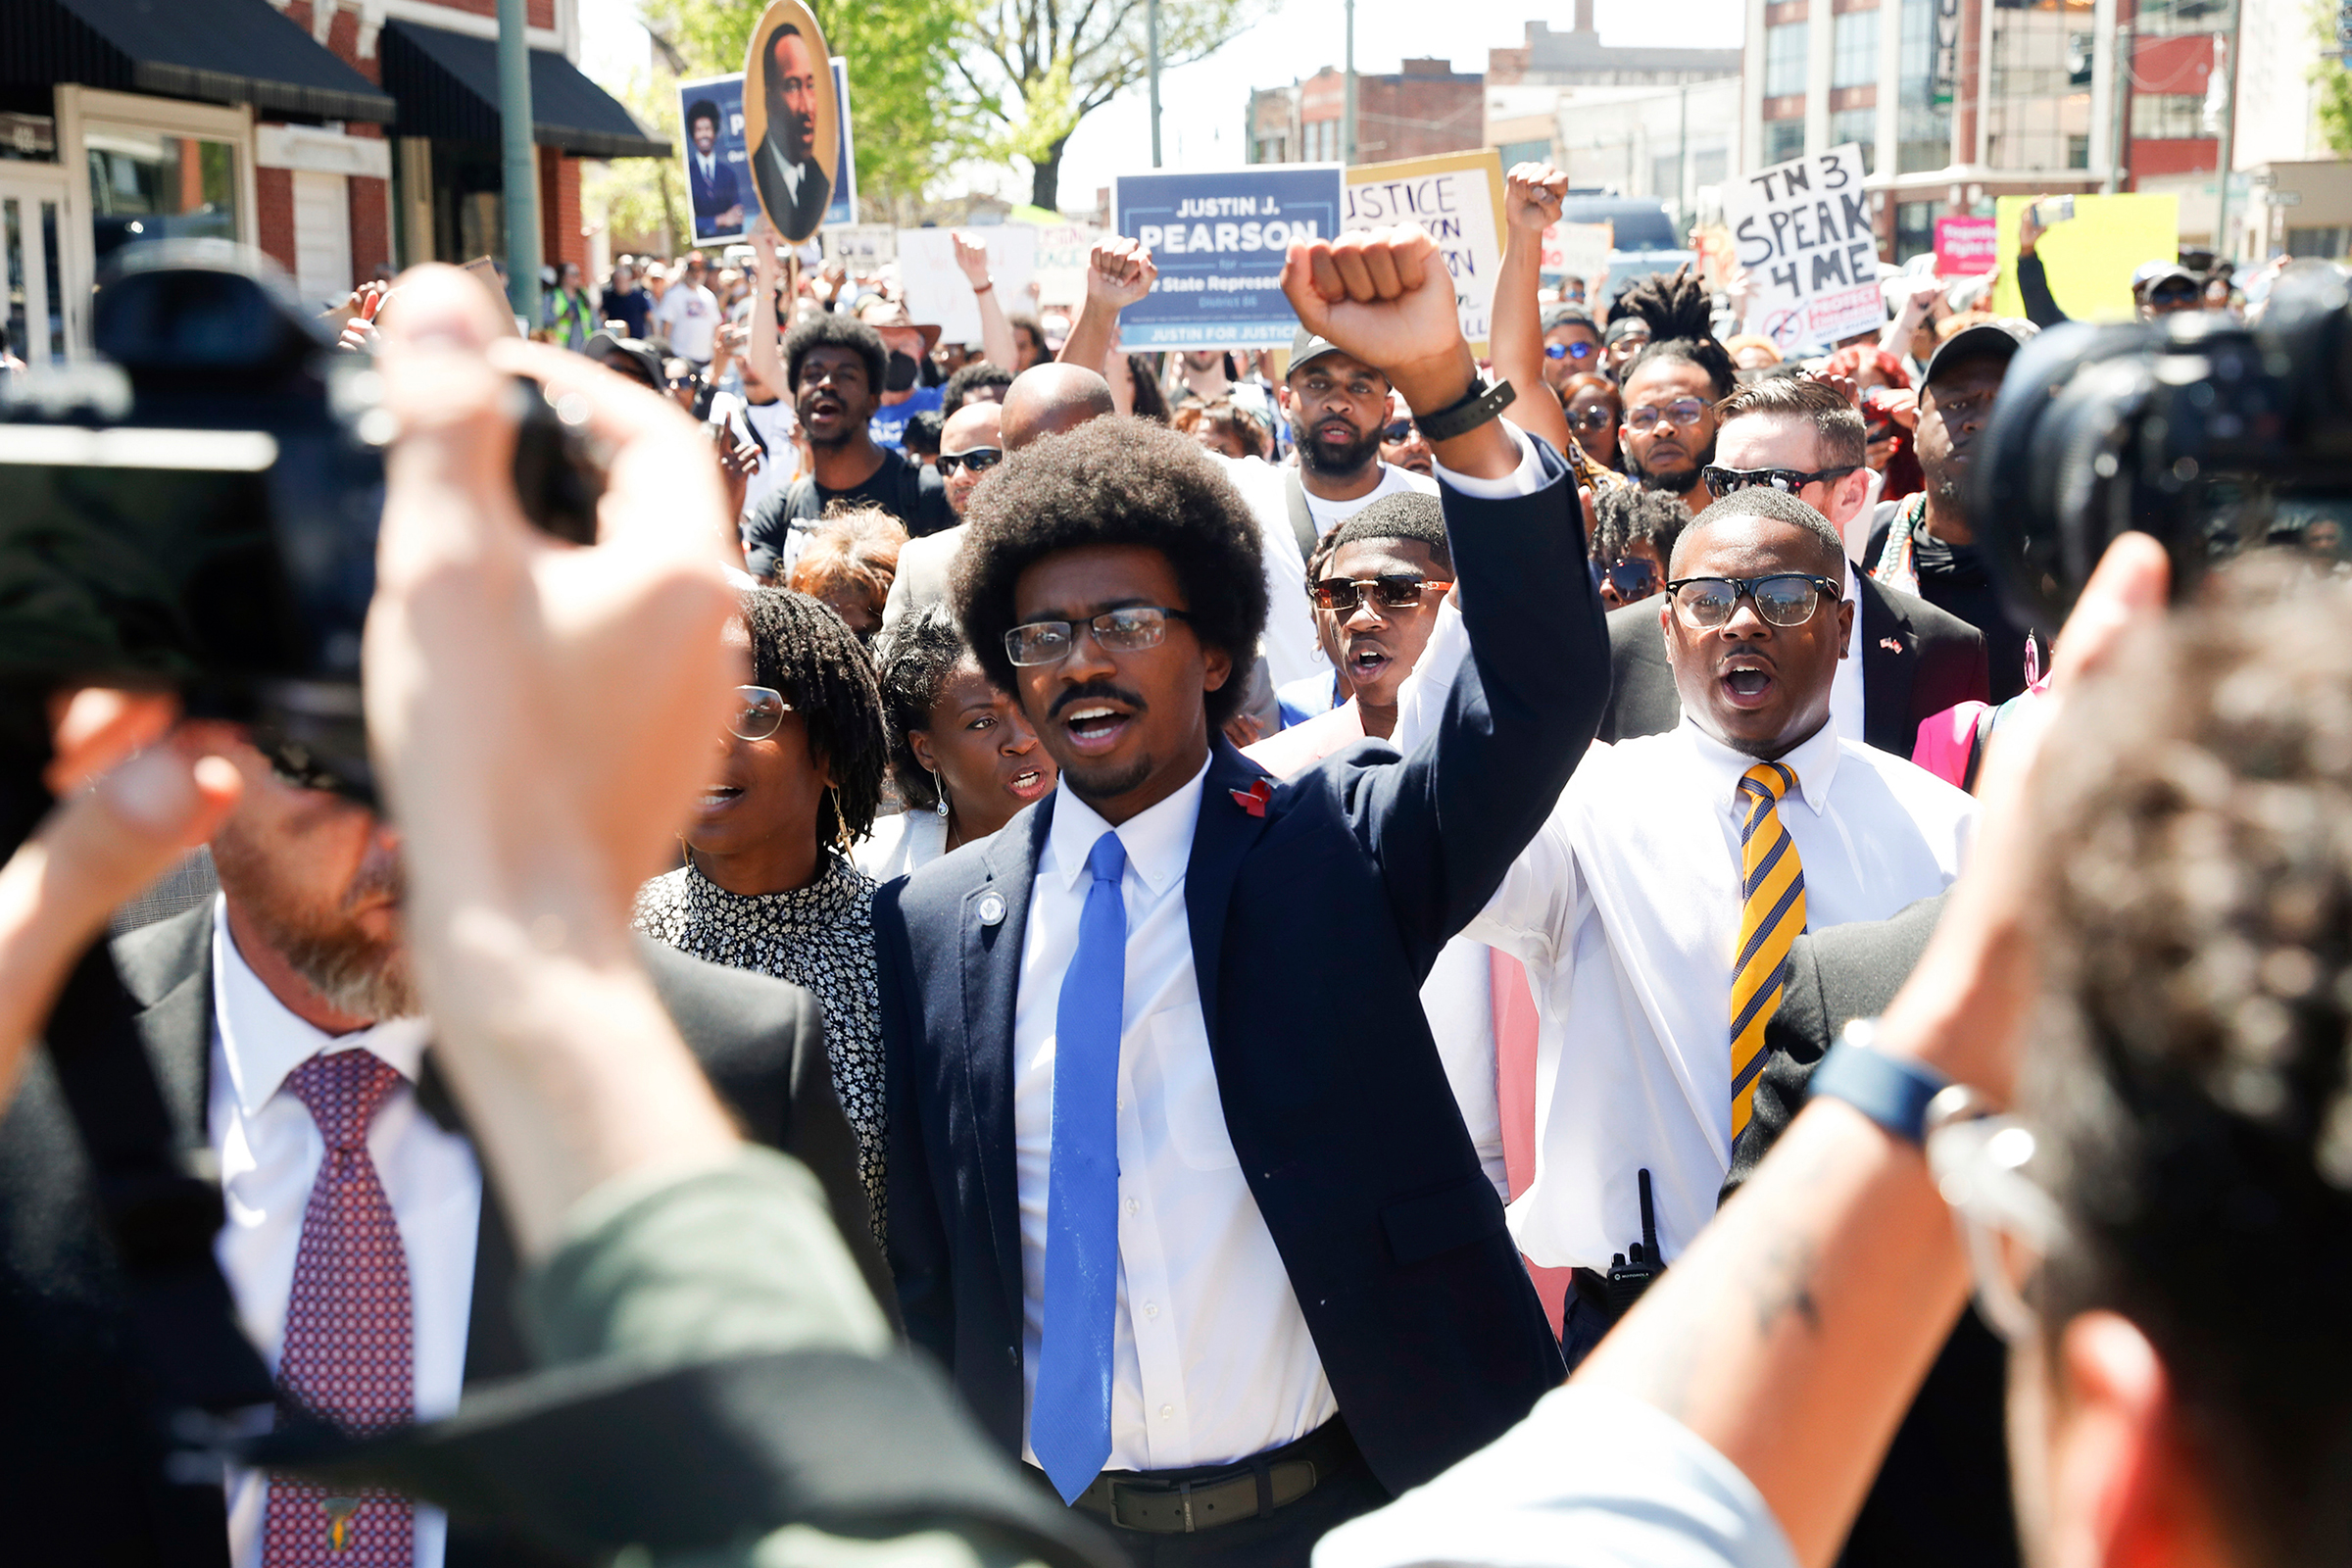 Justin Pearson and his supporters march to the Shelby County Board of Commissioners meeting in Memphis on Wednesday.